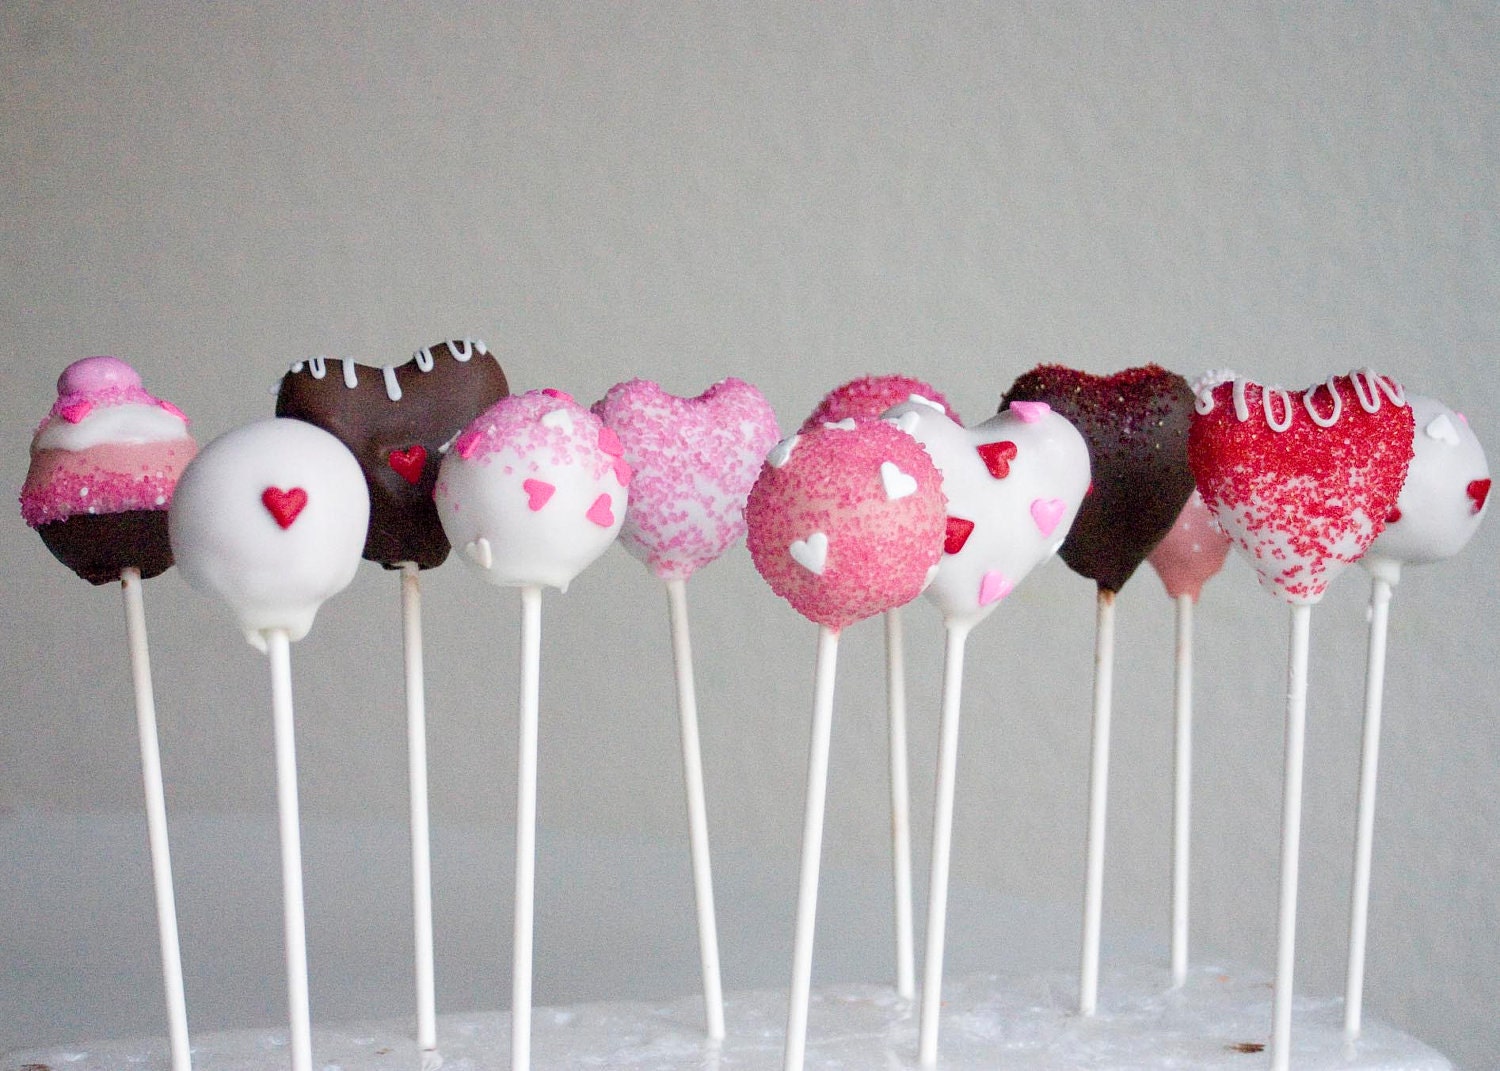 Here are some fun Valentine’s Cake Pops to make and decorate (and eat!) tog...